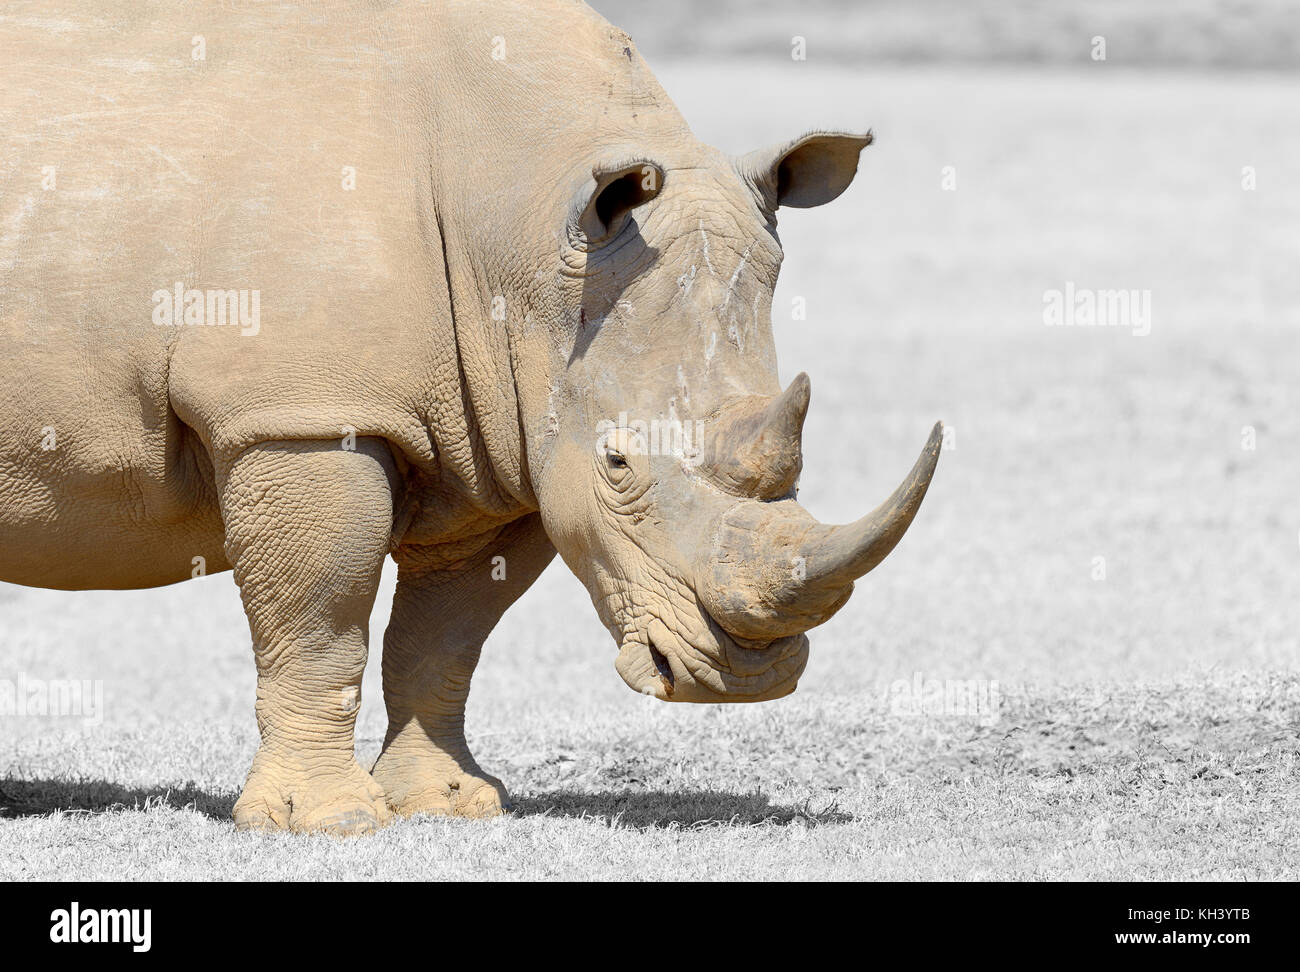 African white rhino, National park of Kenya. Black and white photography with color rhino Stock Photo